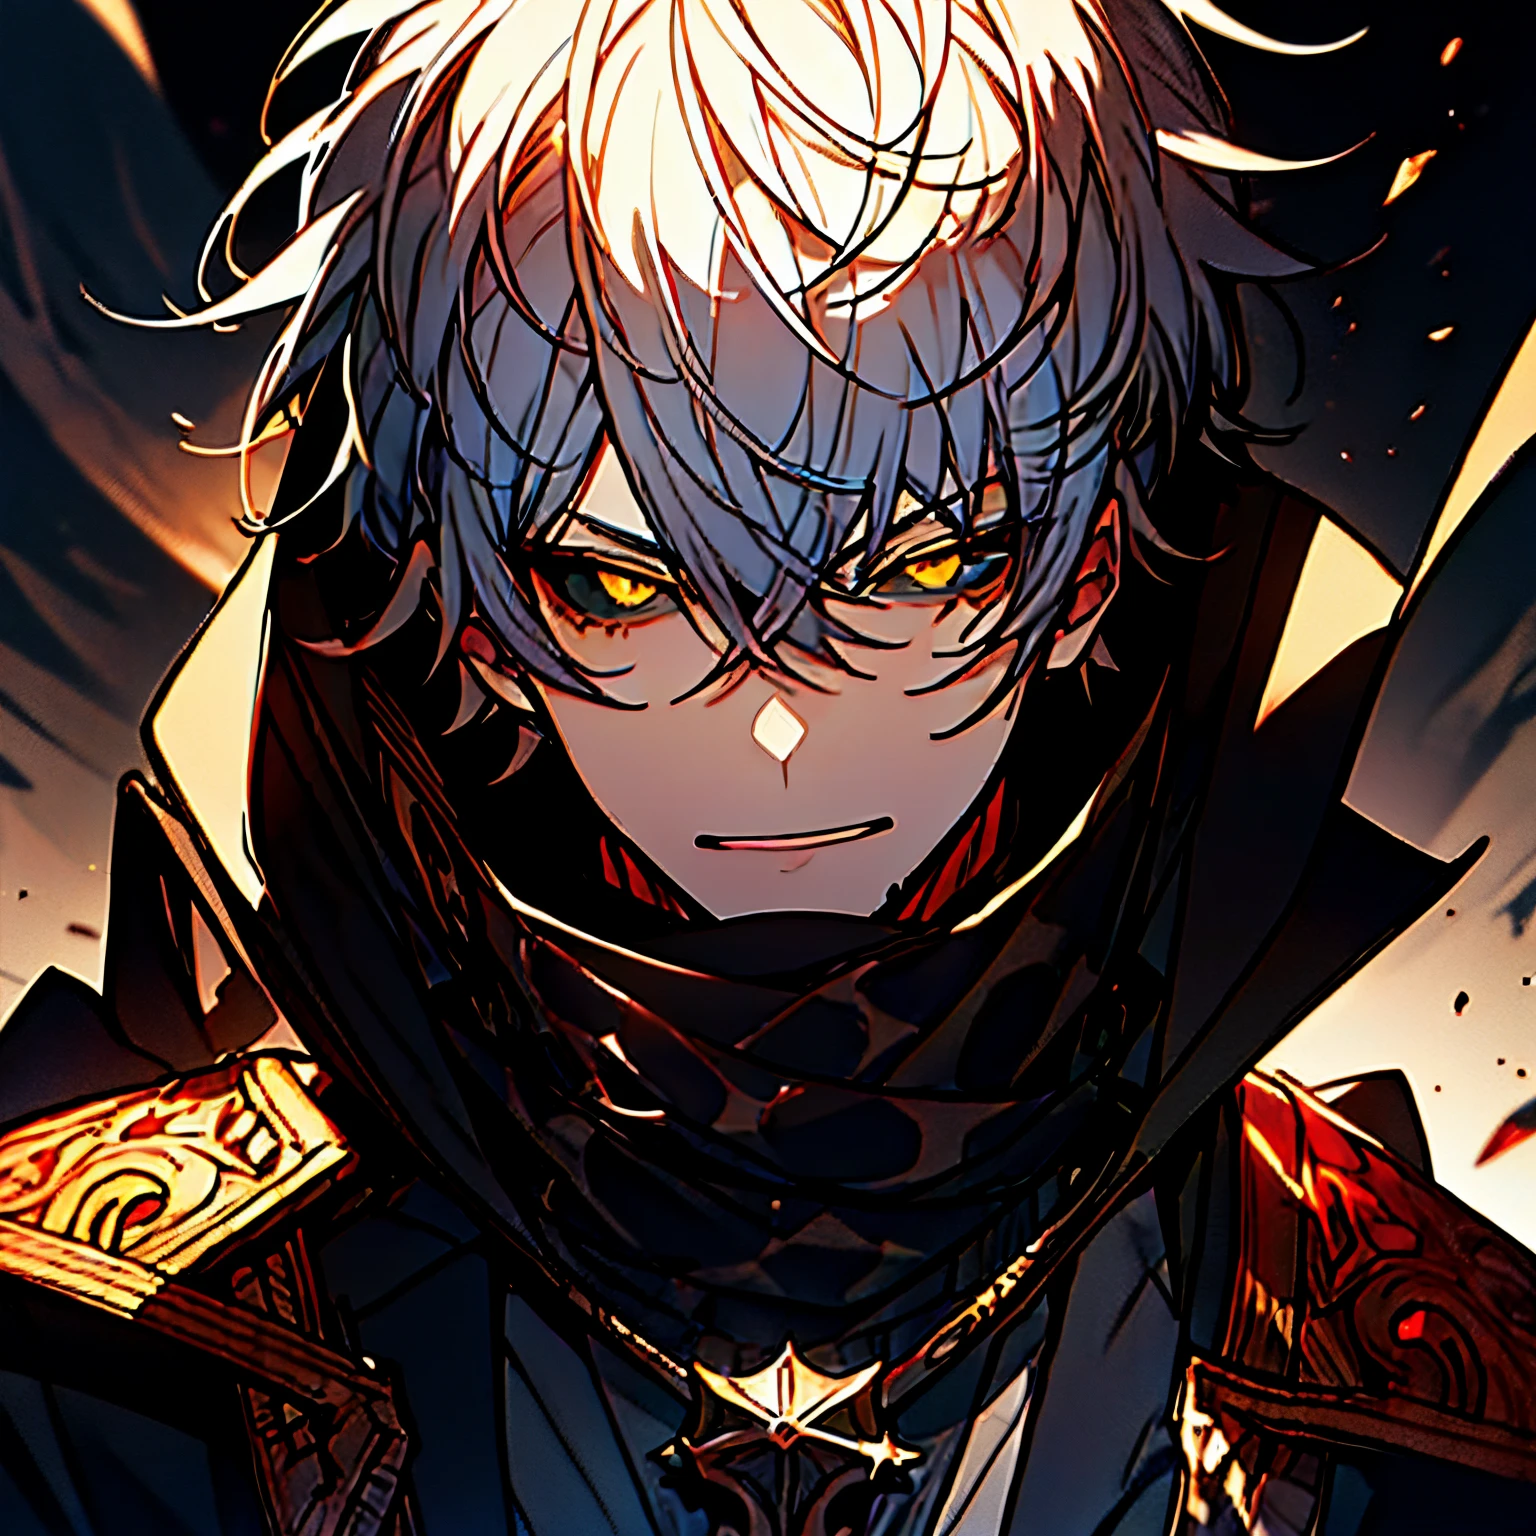 (master piece), best quality, ultra-detailed, illustration, warm lighting, soft lighting, bright colors, 1 adult guy, anime character with white hair with red tips, shadowverse style, black overcoat, serious, yellow eyes, black sclera.